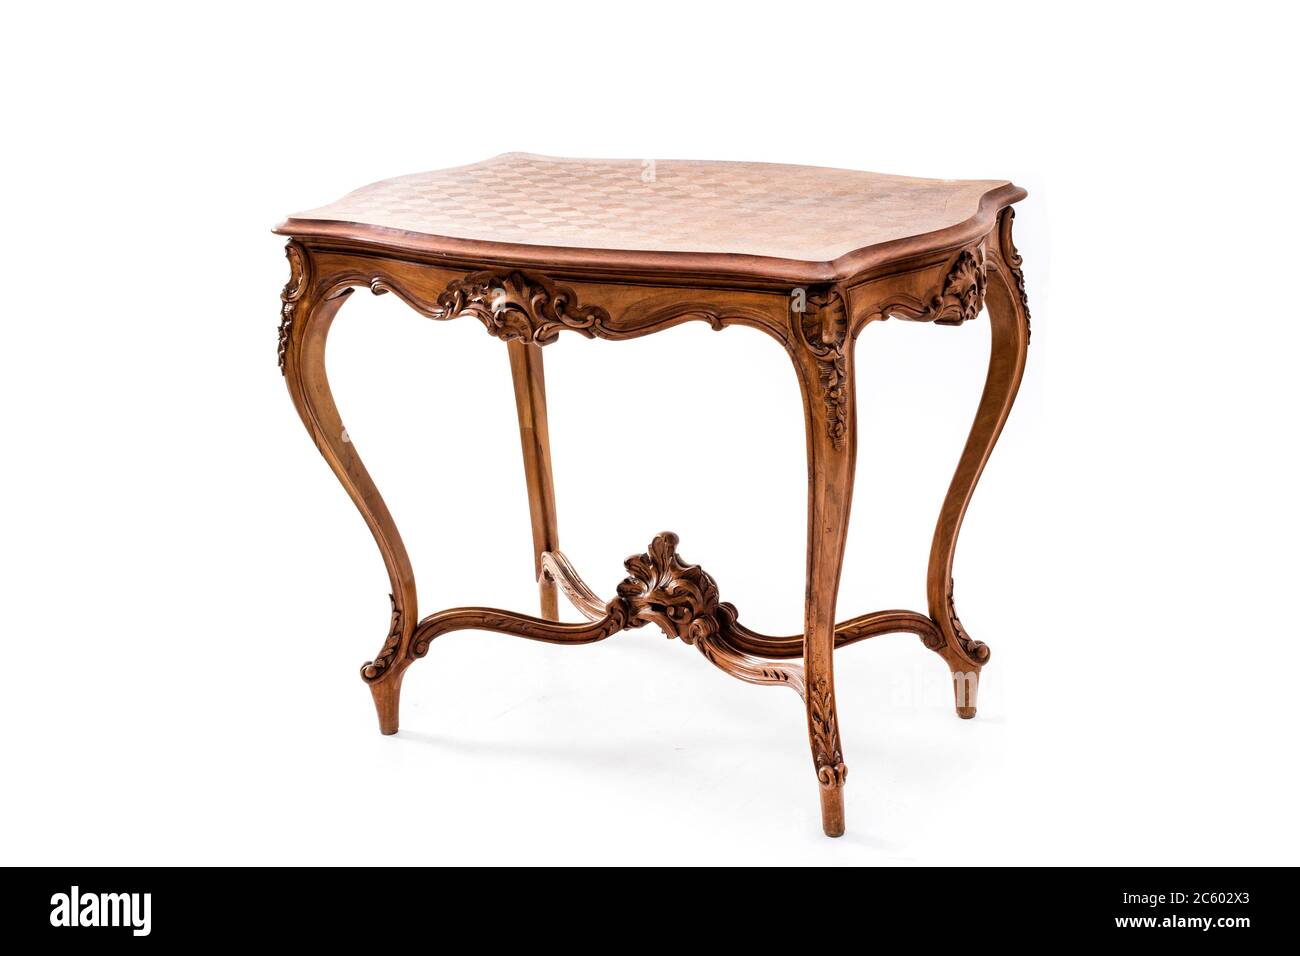 Eurioean antique figure koffee table in baroque style on the white background Stock Photo